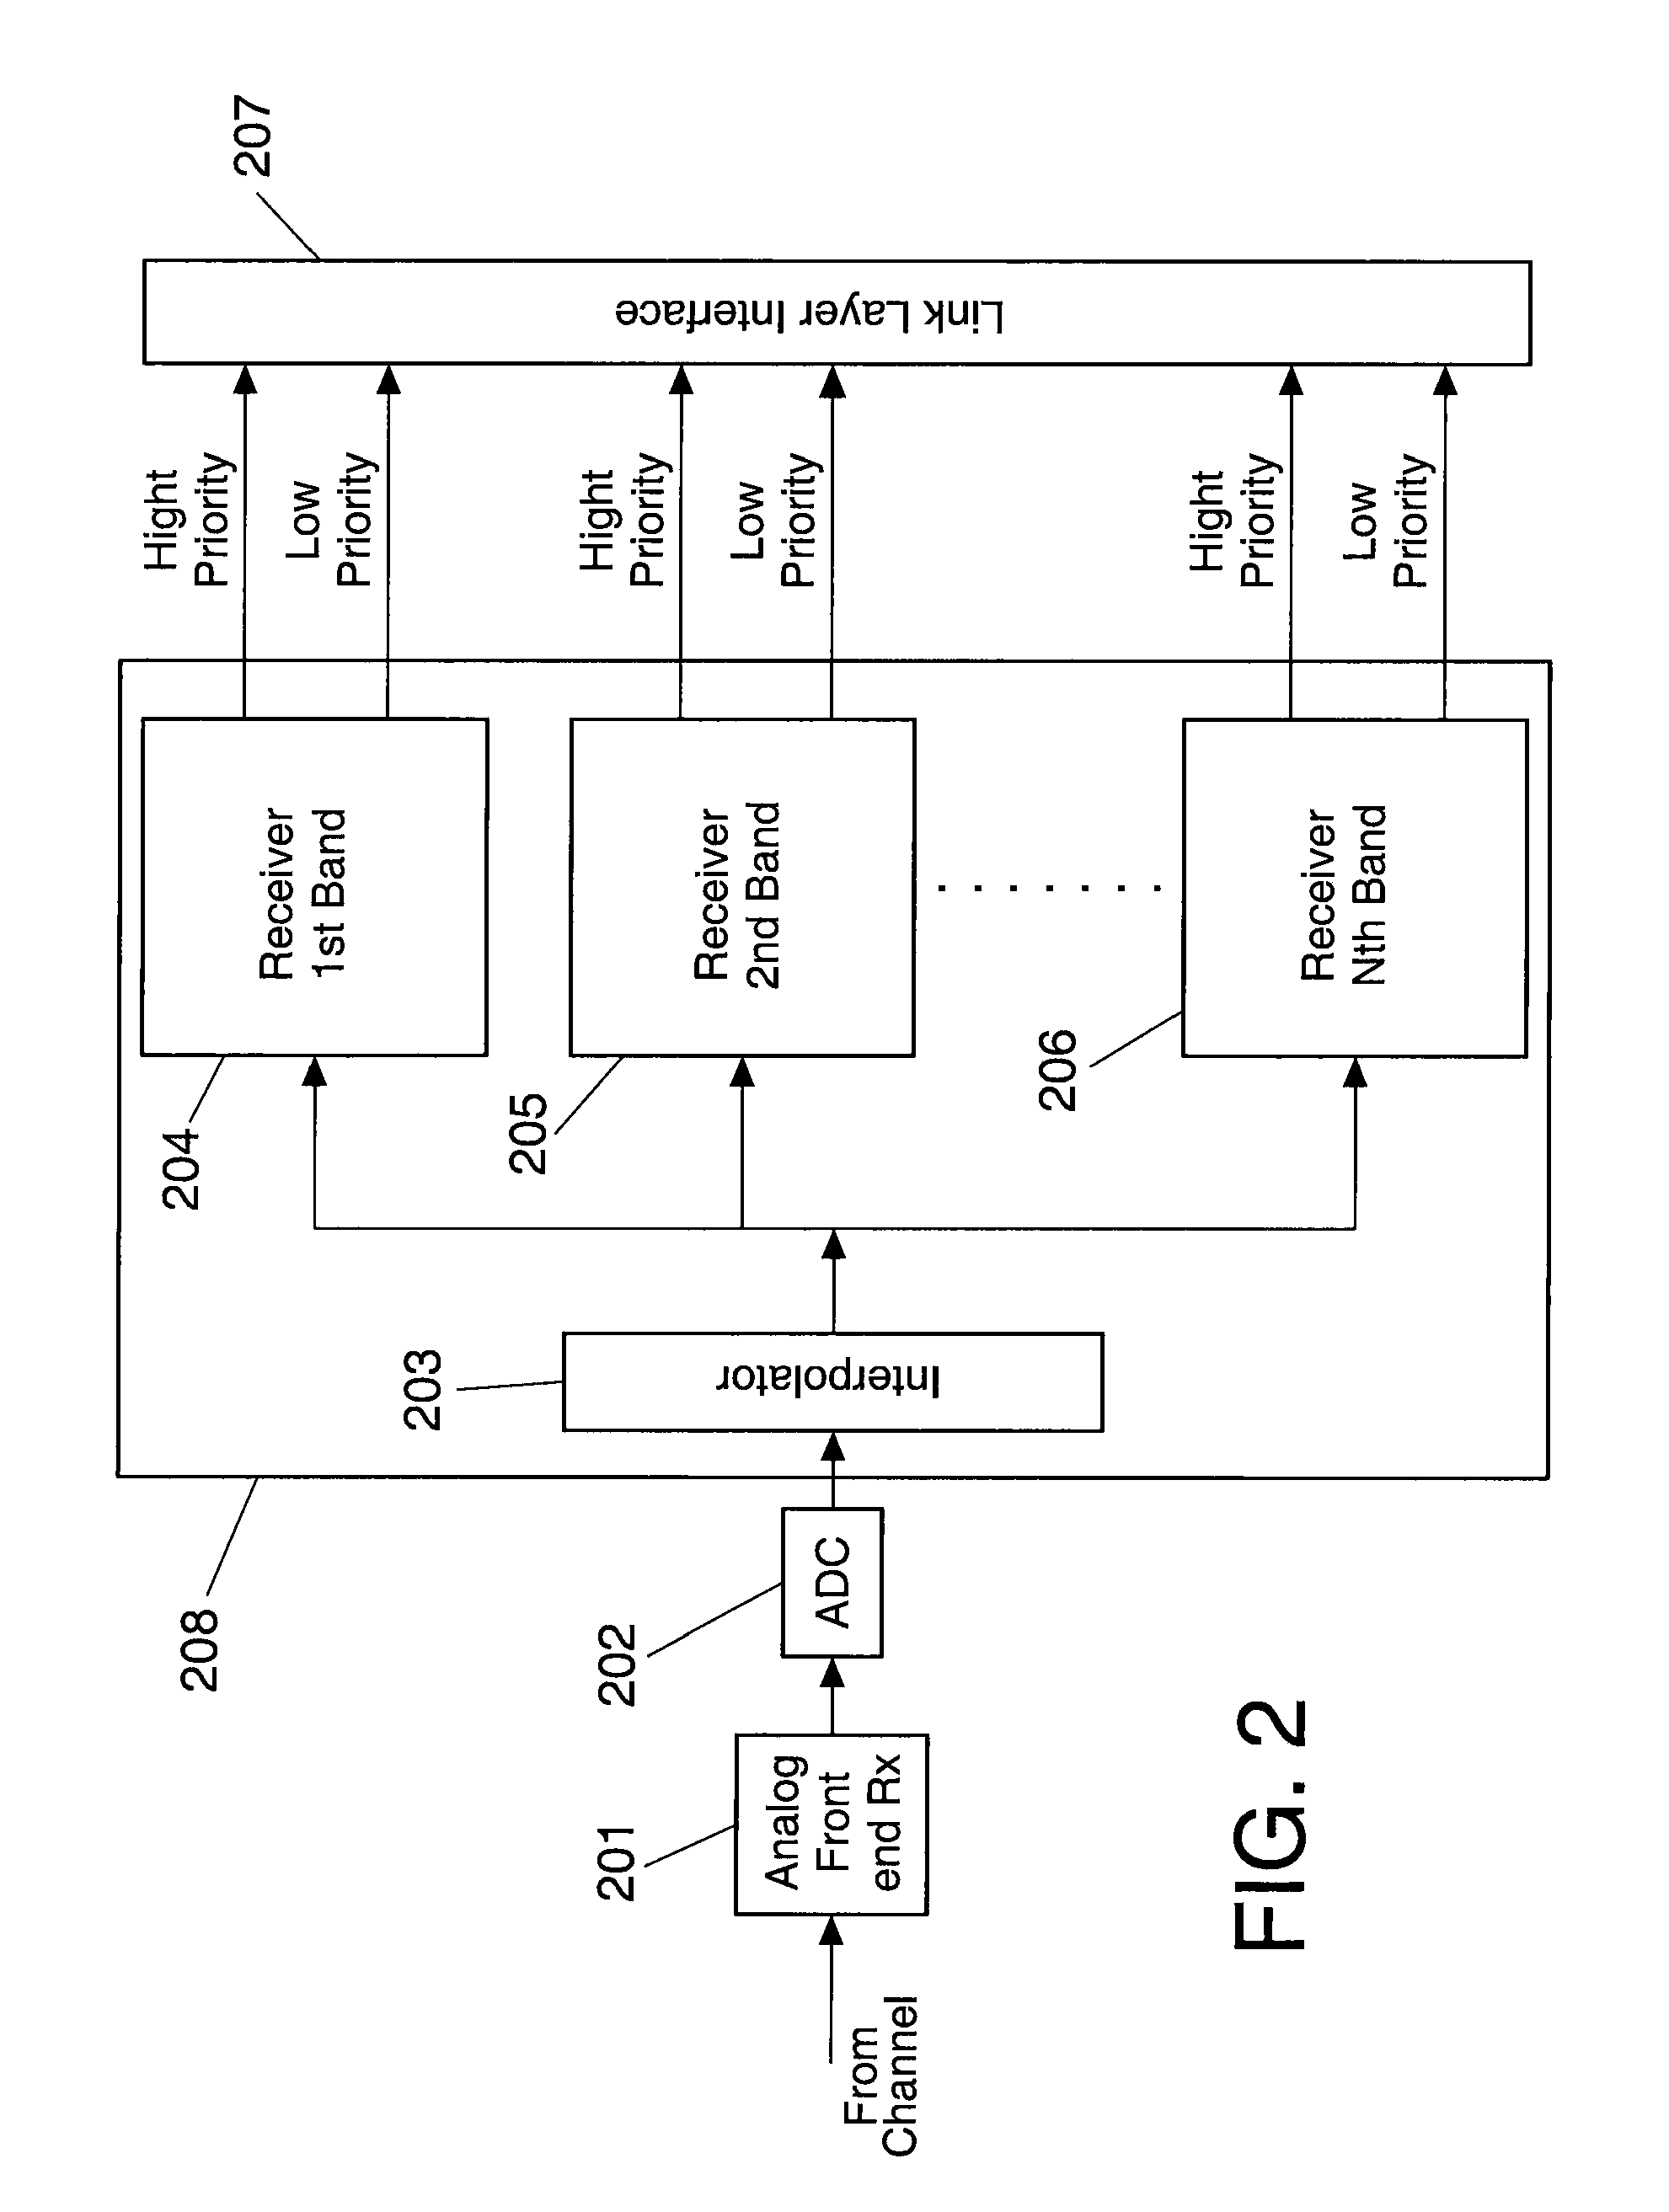 System and transceiver for DSL communications based on single carrier modulation, with efficient vectoring, capacity approaching channel coding structure and preamble insertion for agile channel adaptation